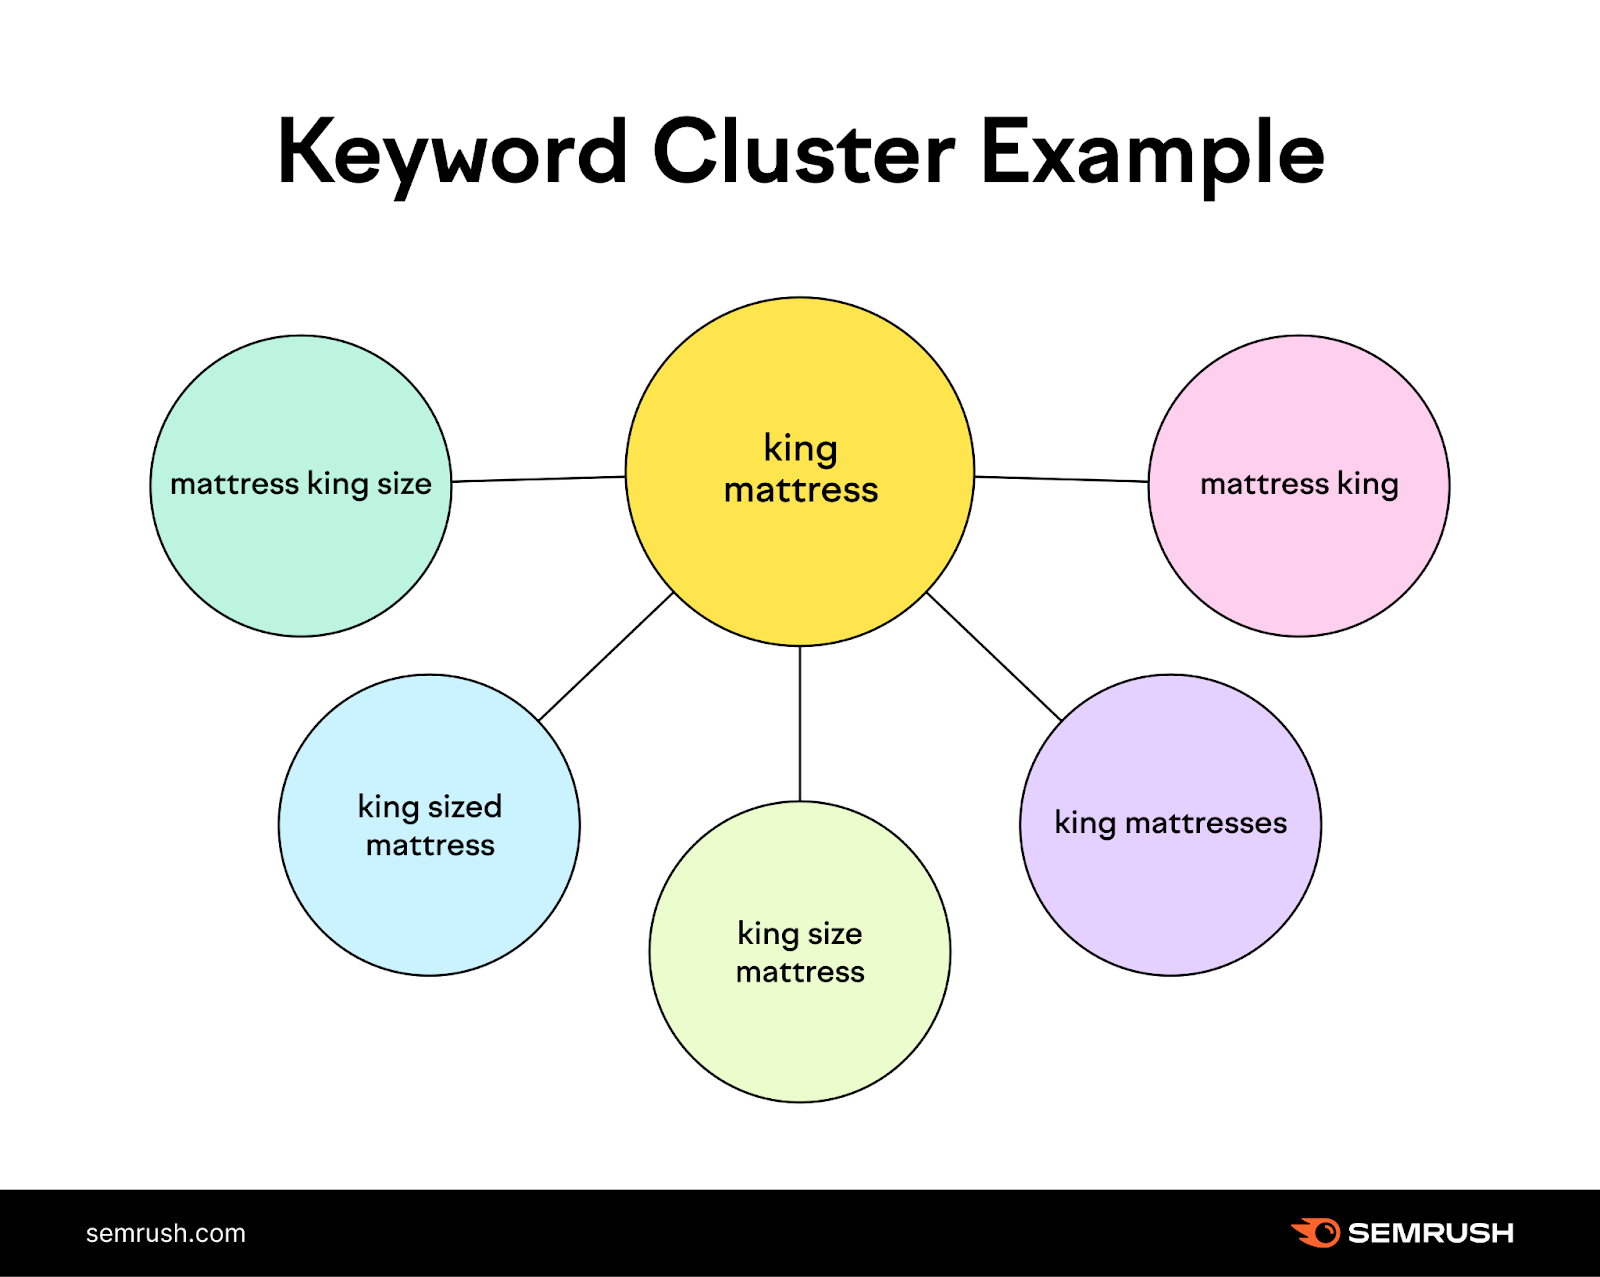 Keyword cluster example for "king mattress"